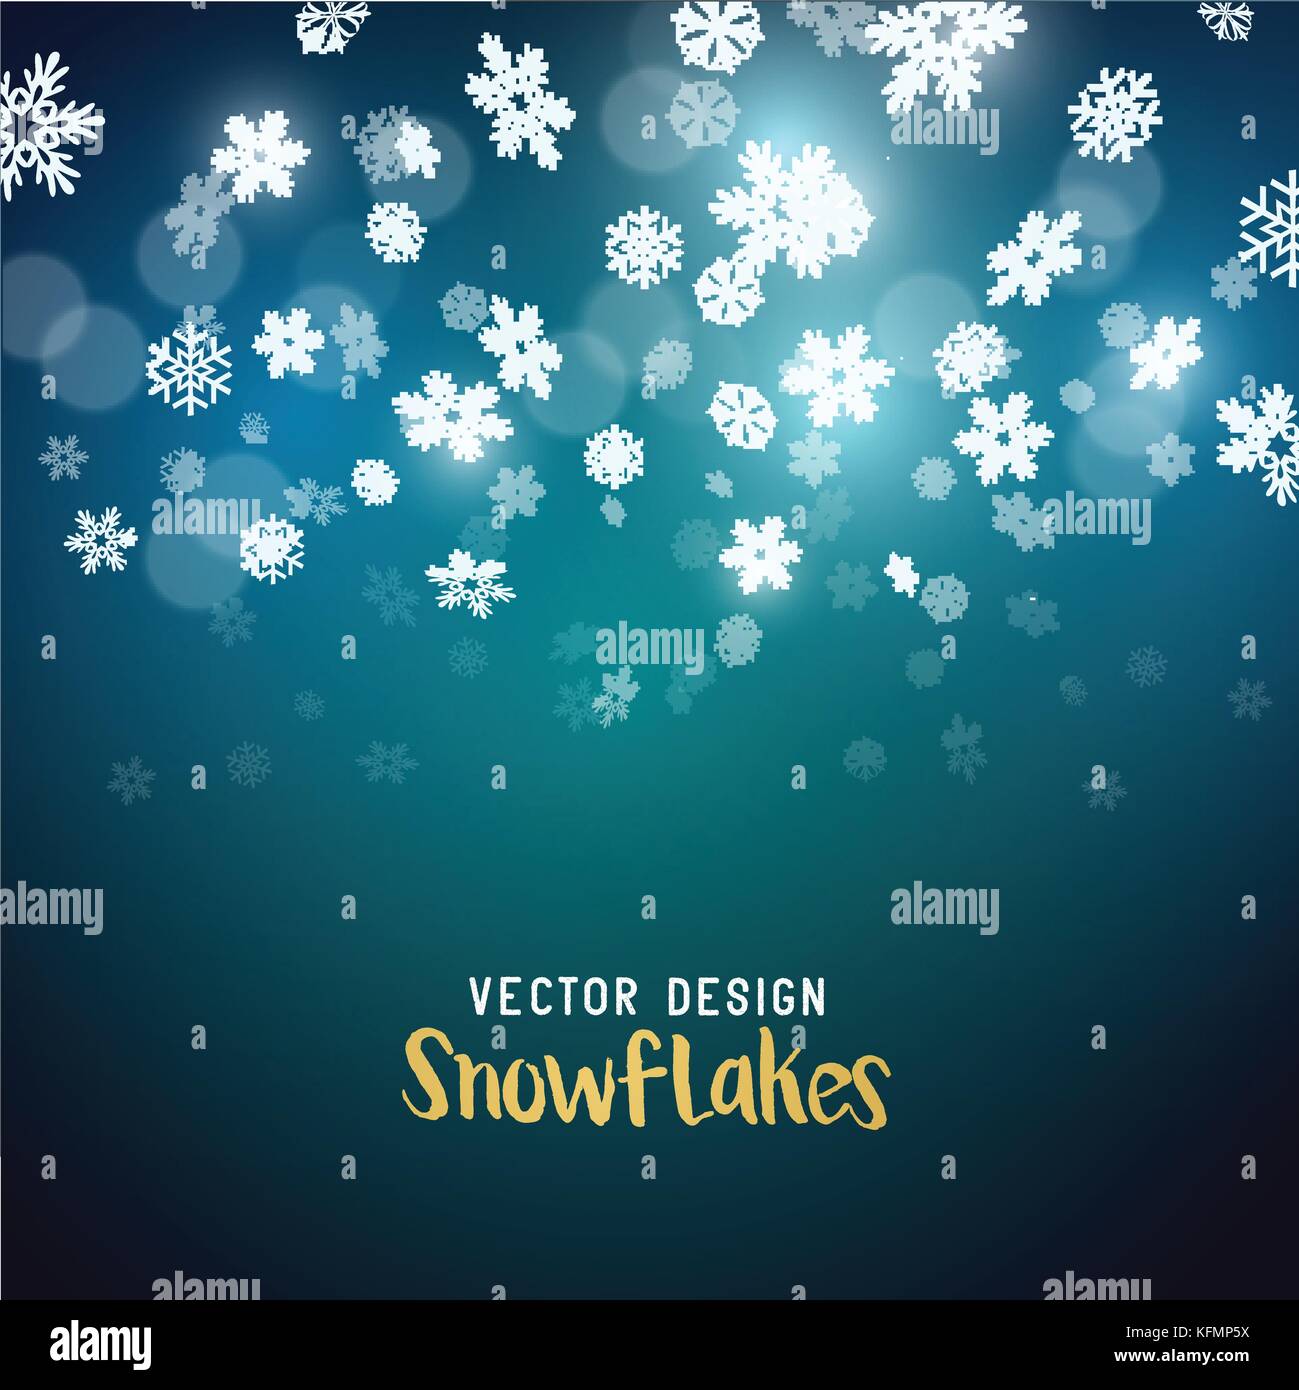 slowly falling Christmas snowflakes background vector illustration. Stock Vector